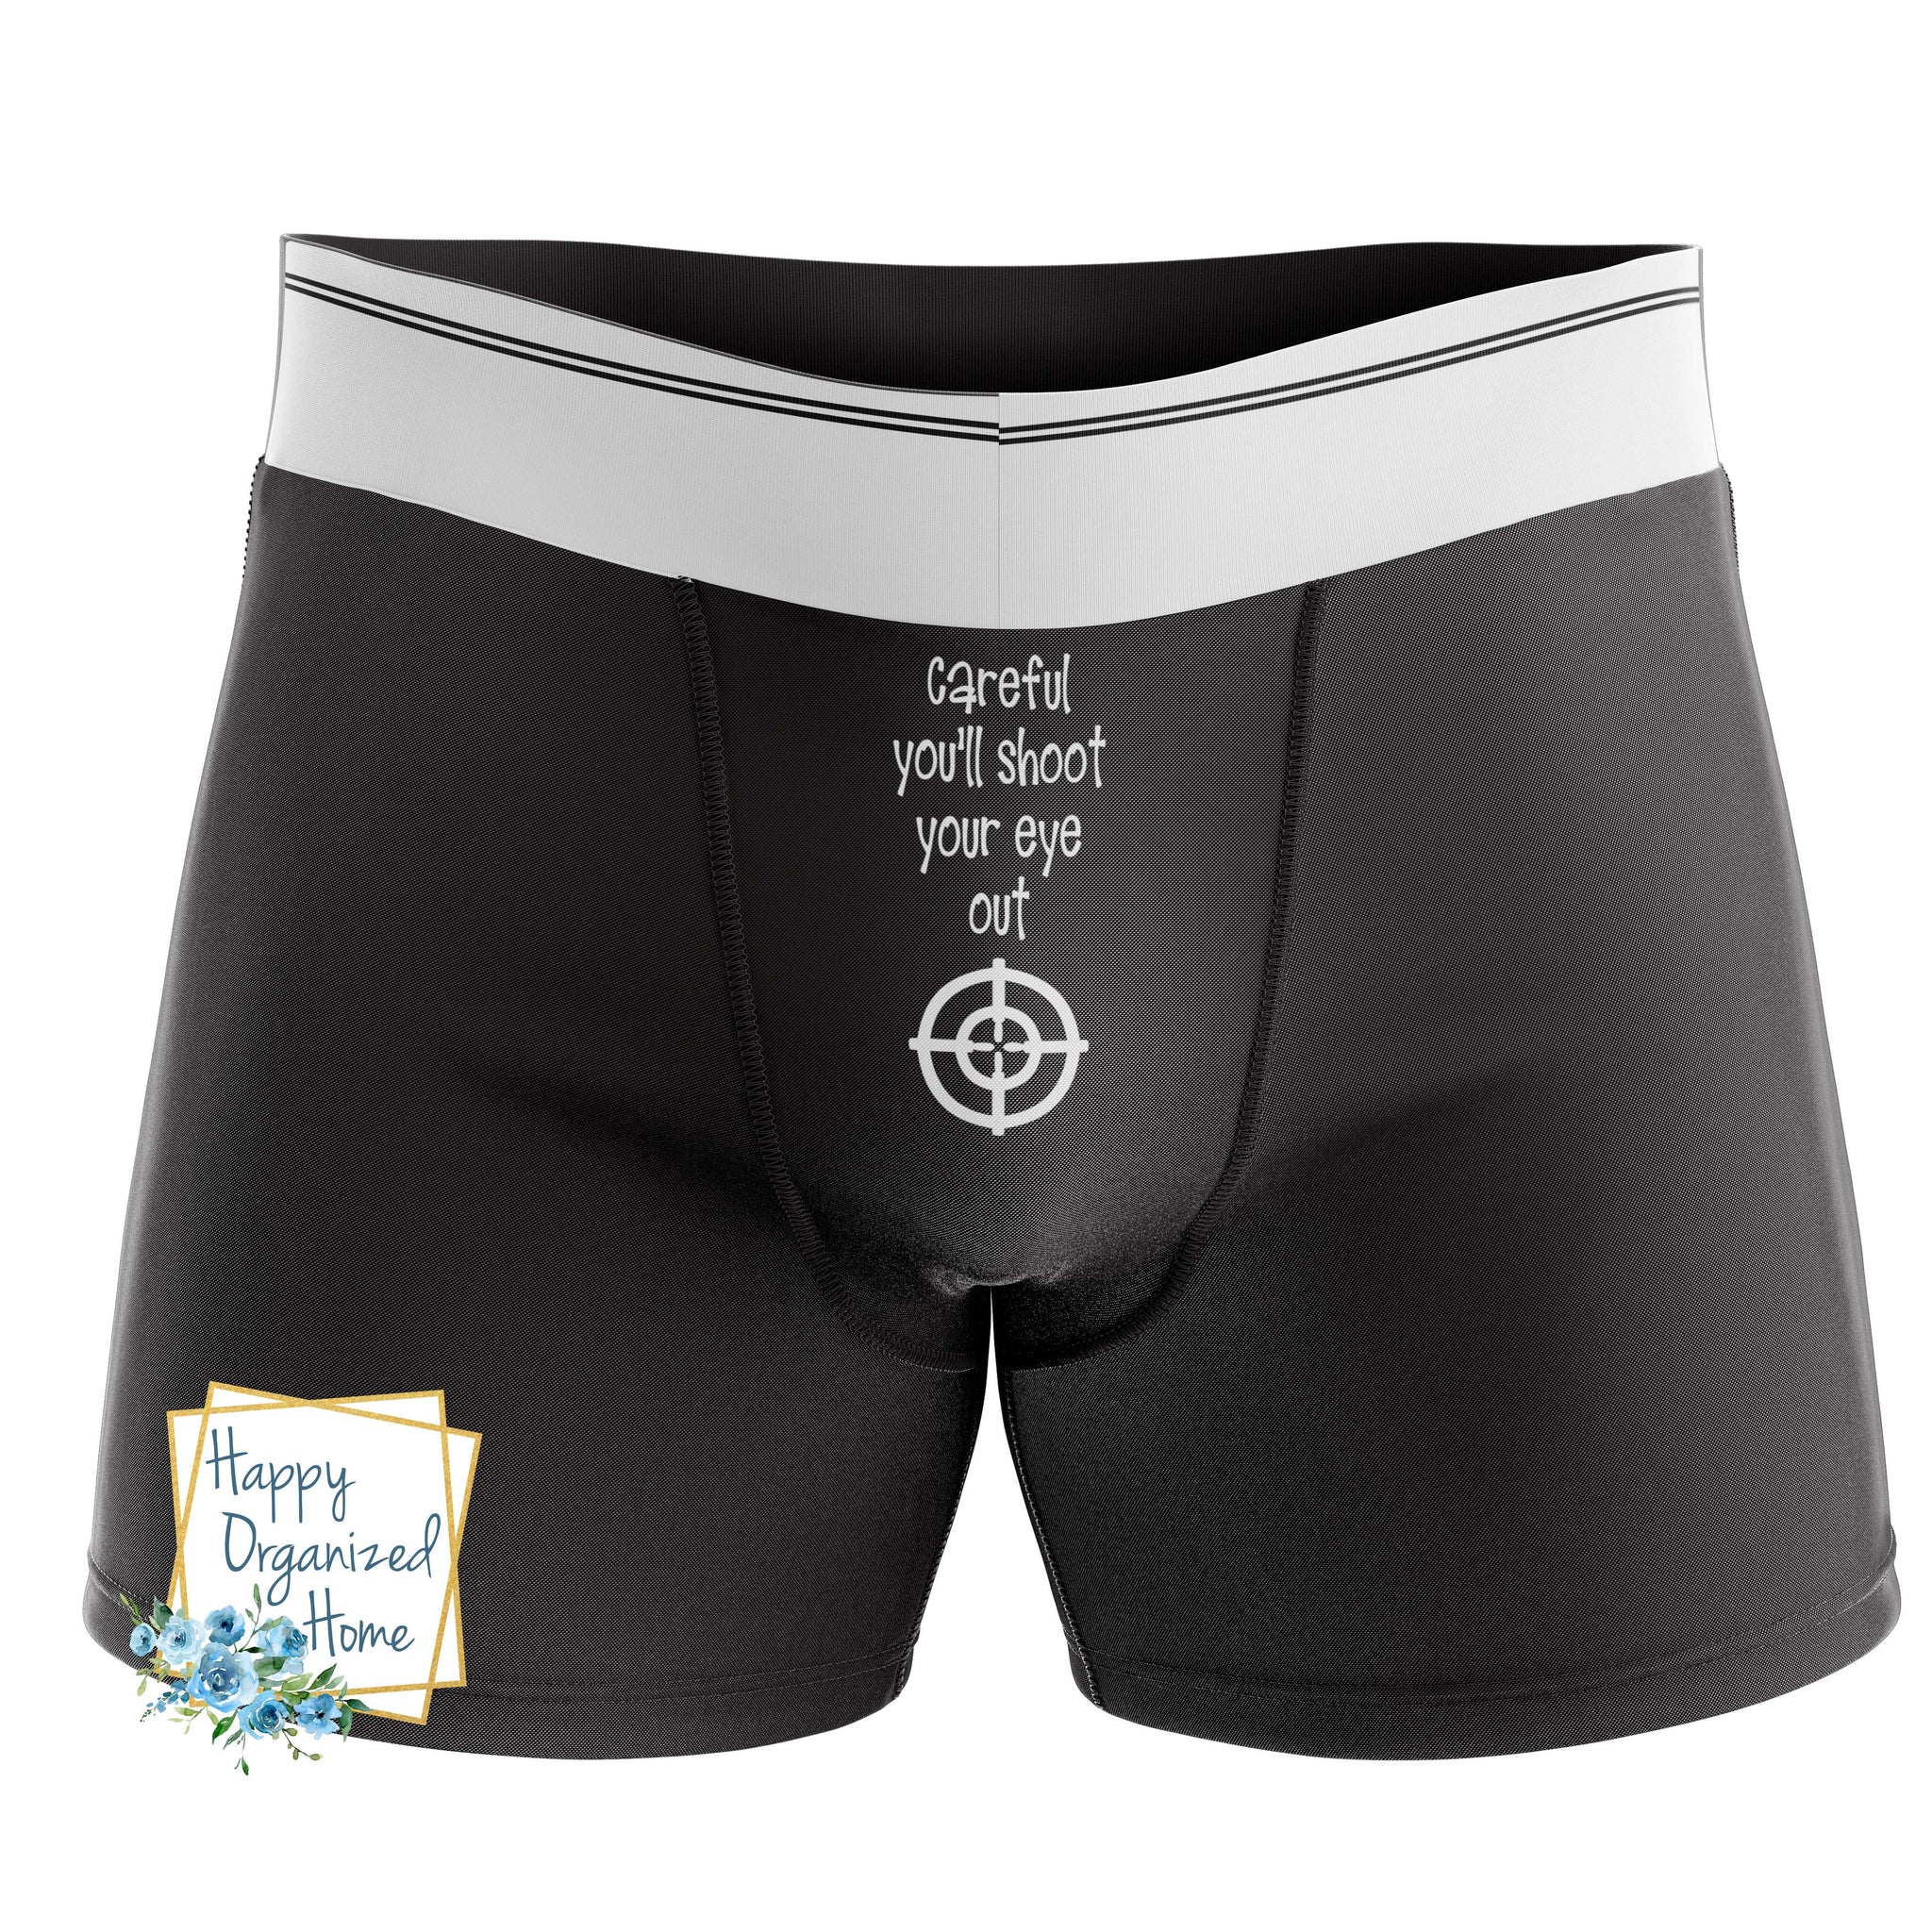 Careful you'll shoot your eye out -  Men's Naughty Boxer Briefs